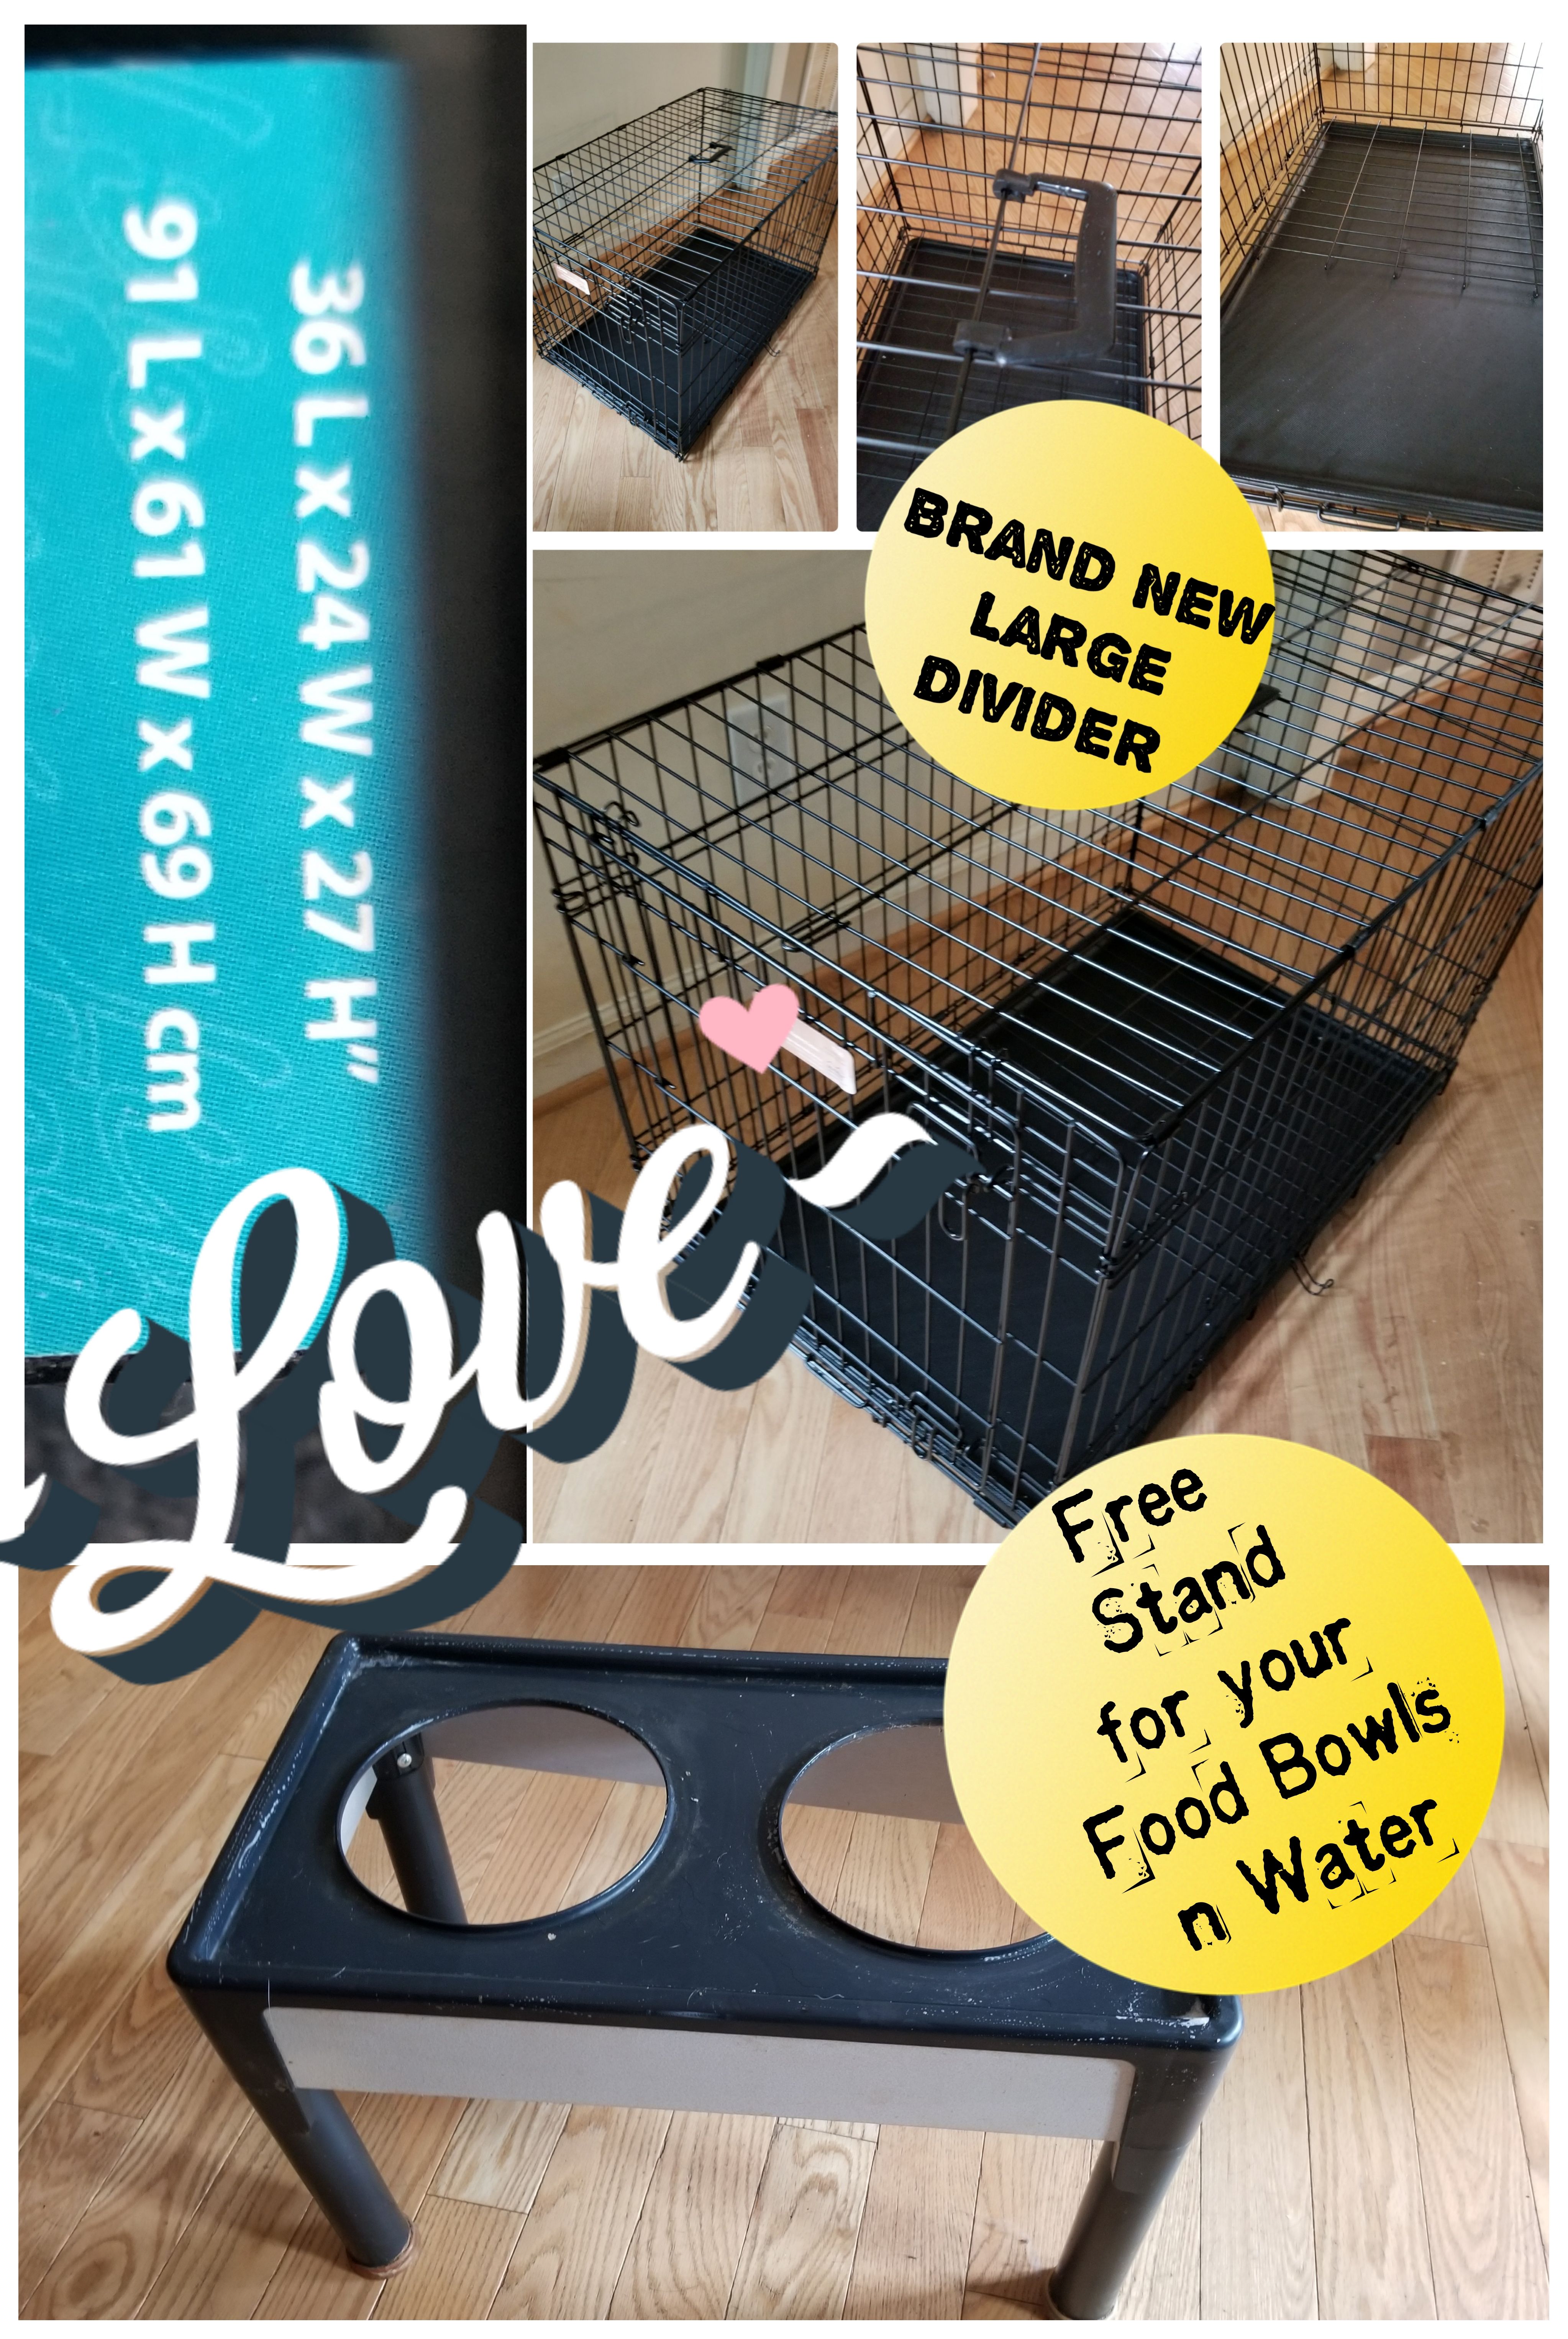 Brand new dog crate Free Stand